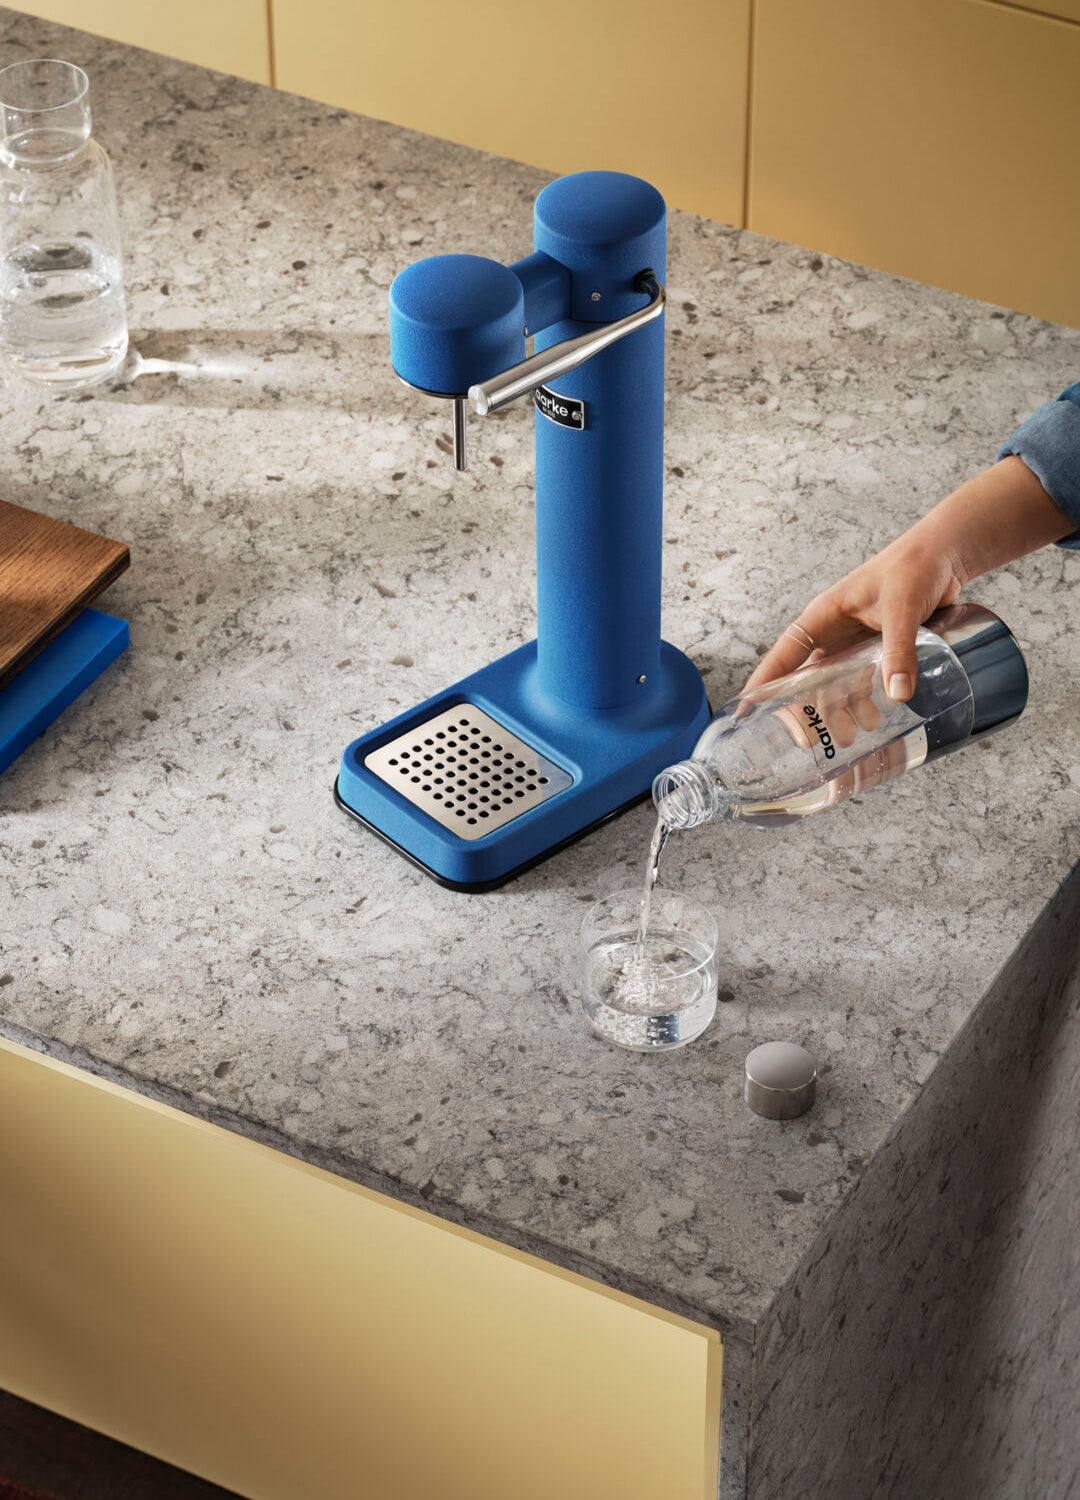 Aarke Carbonator 3 steel sparkling water maker creates perfects bubbles in  10 seconds » Gadget Flow